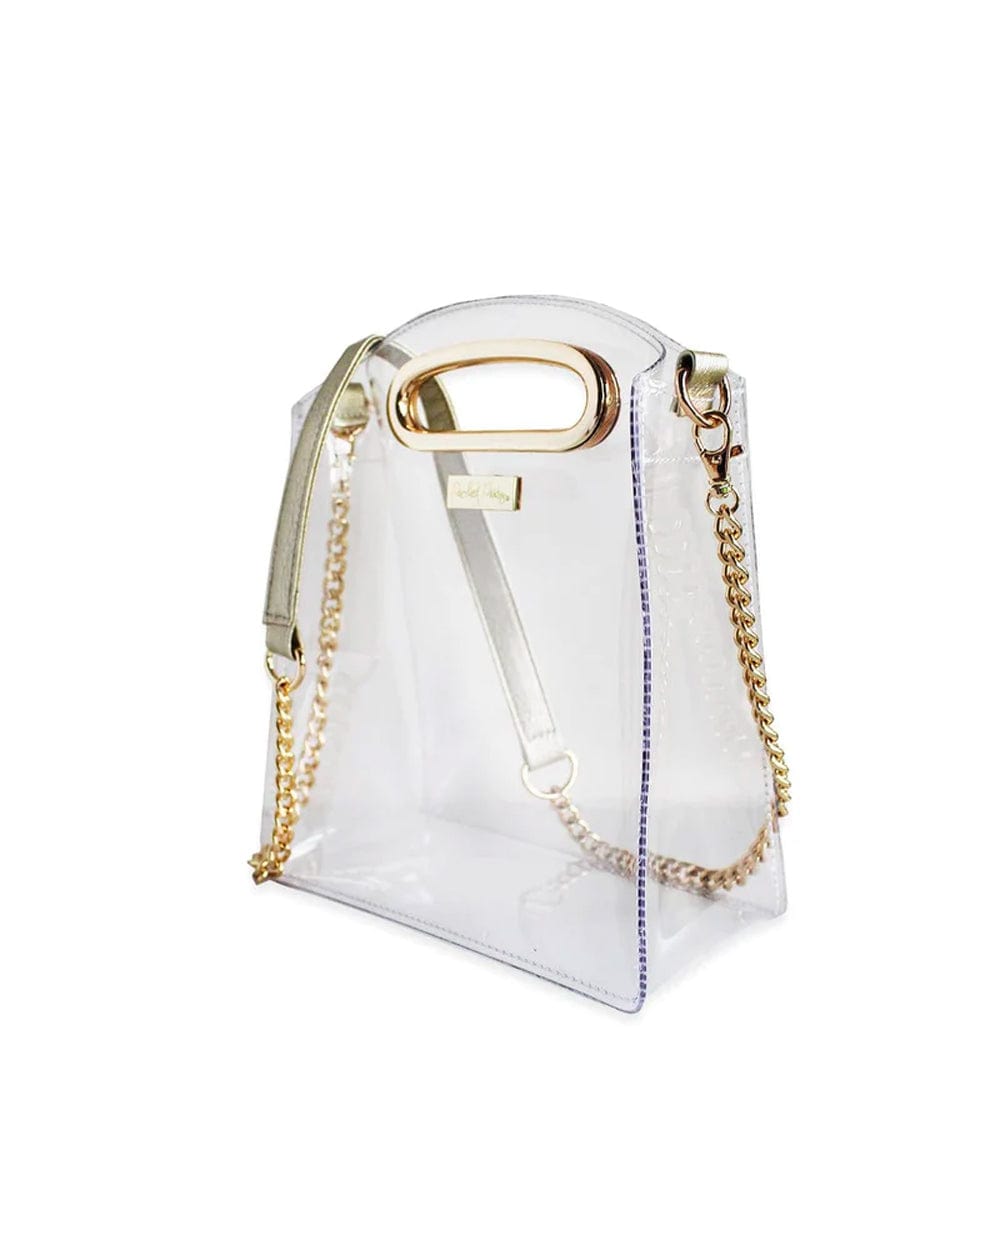 COOPER CROSSBODY GOLD CLEAR PURSE – Packed Party